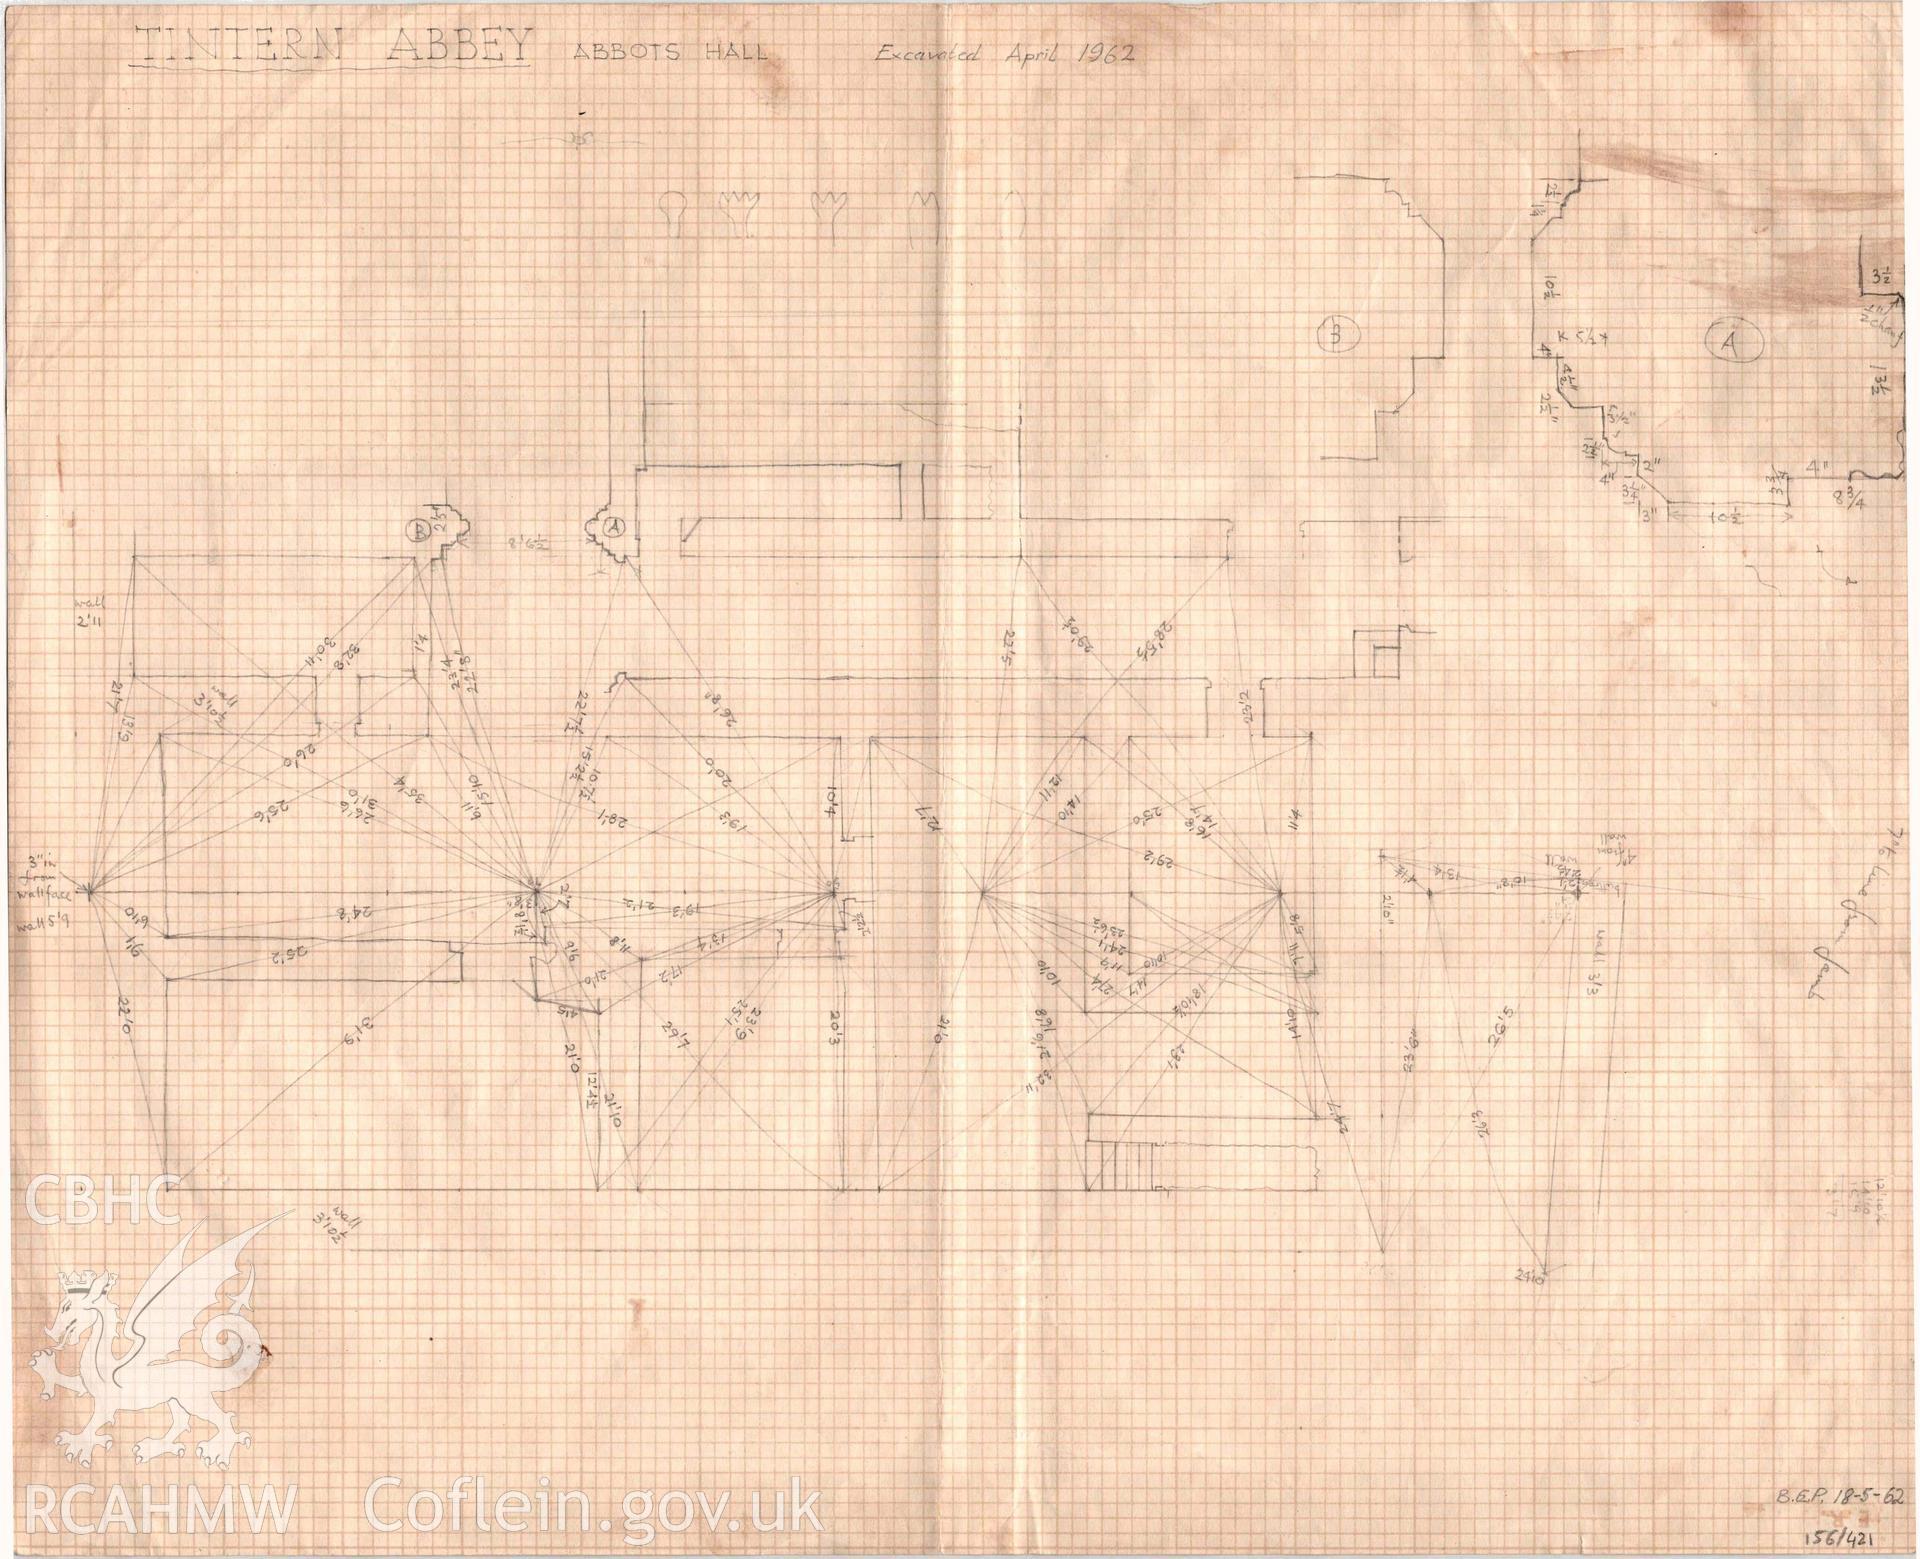 Cadw Guardianship monument drawing, pencil on graph paper, abbots hall, excavated April 1962, Tintern Abbey. Dated May 1962.